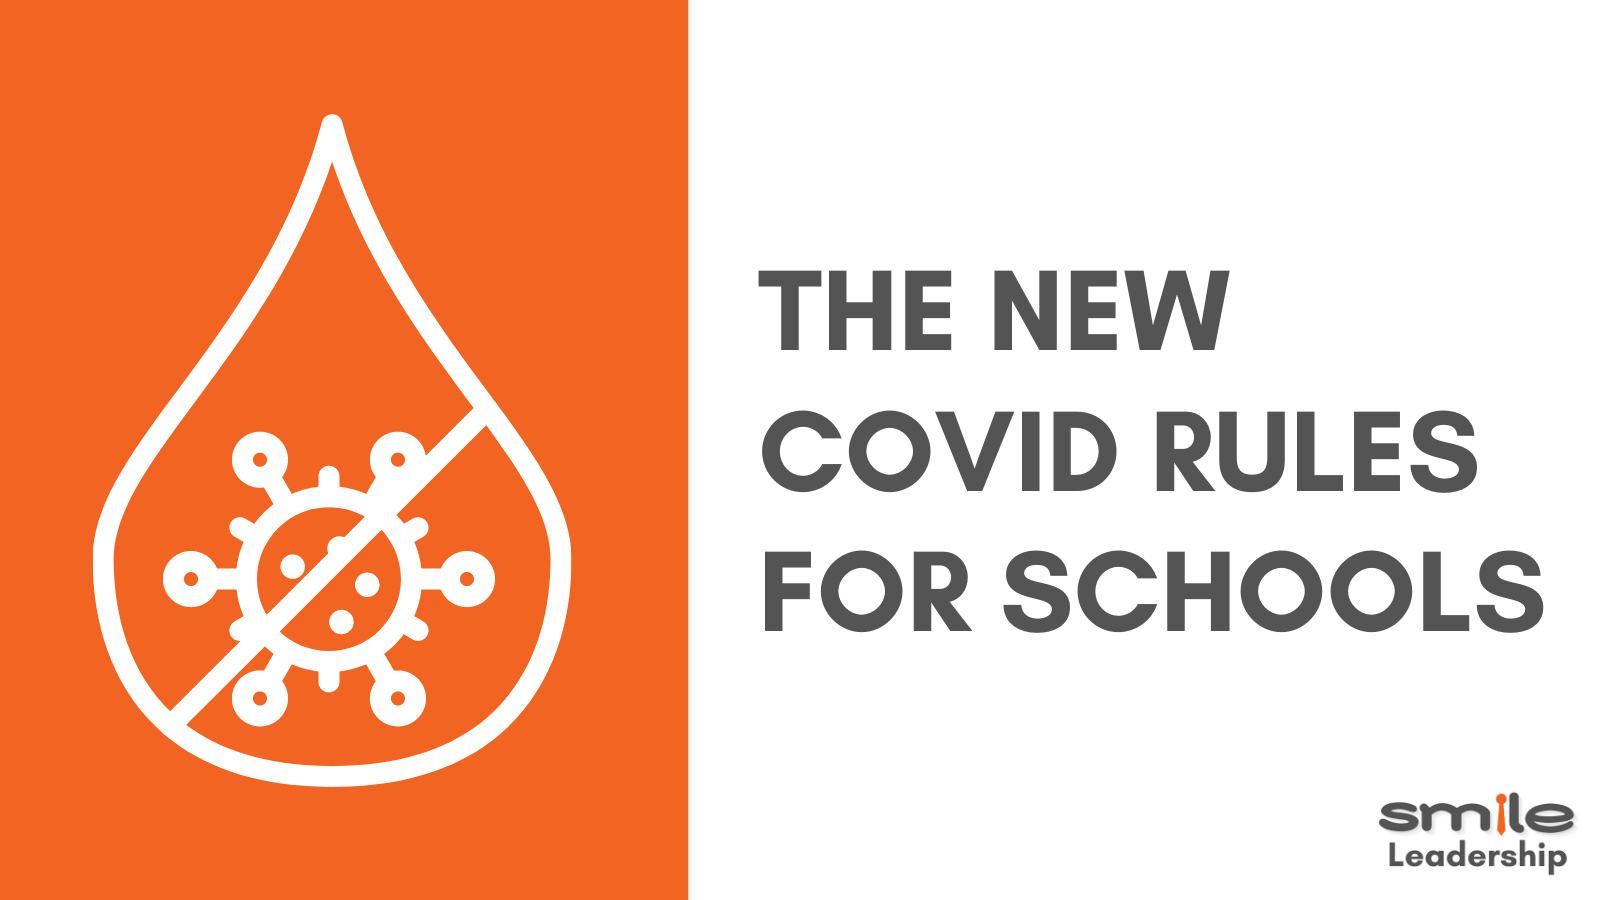 The New Covid Rules in Schools